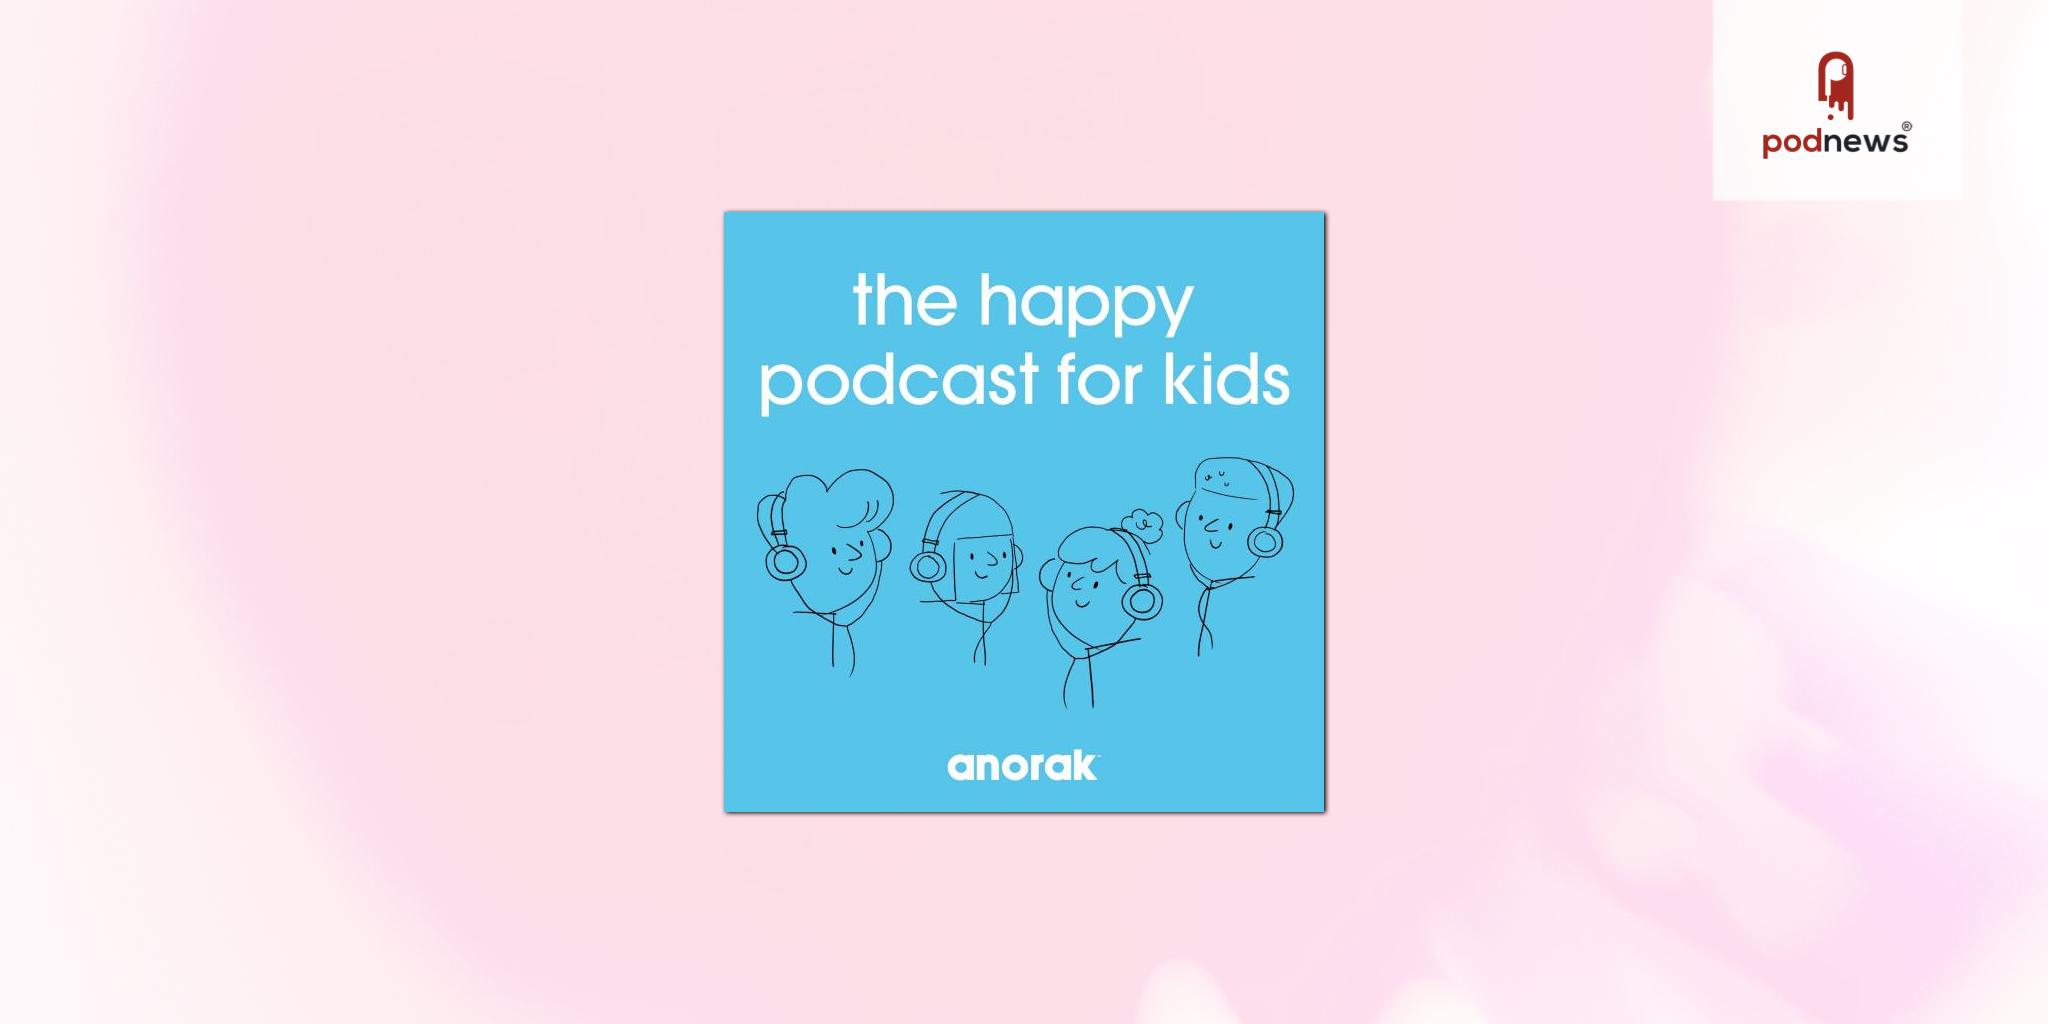 “How do whales pee?” asks Anorak’s The Happy Podcast for Kids